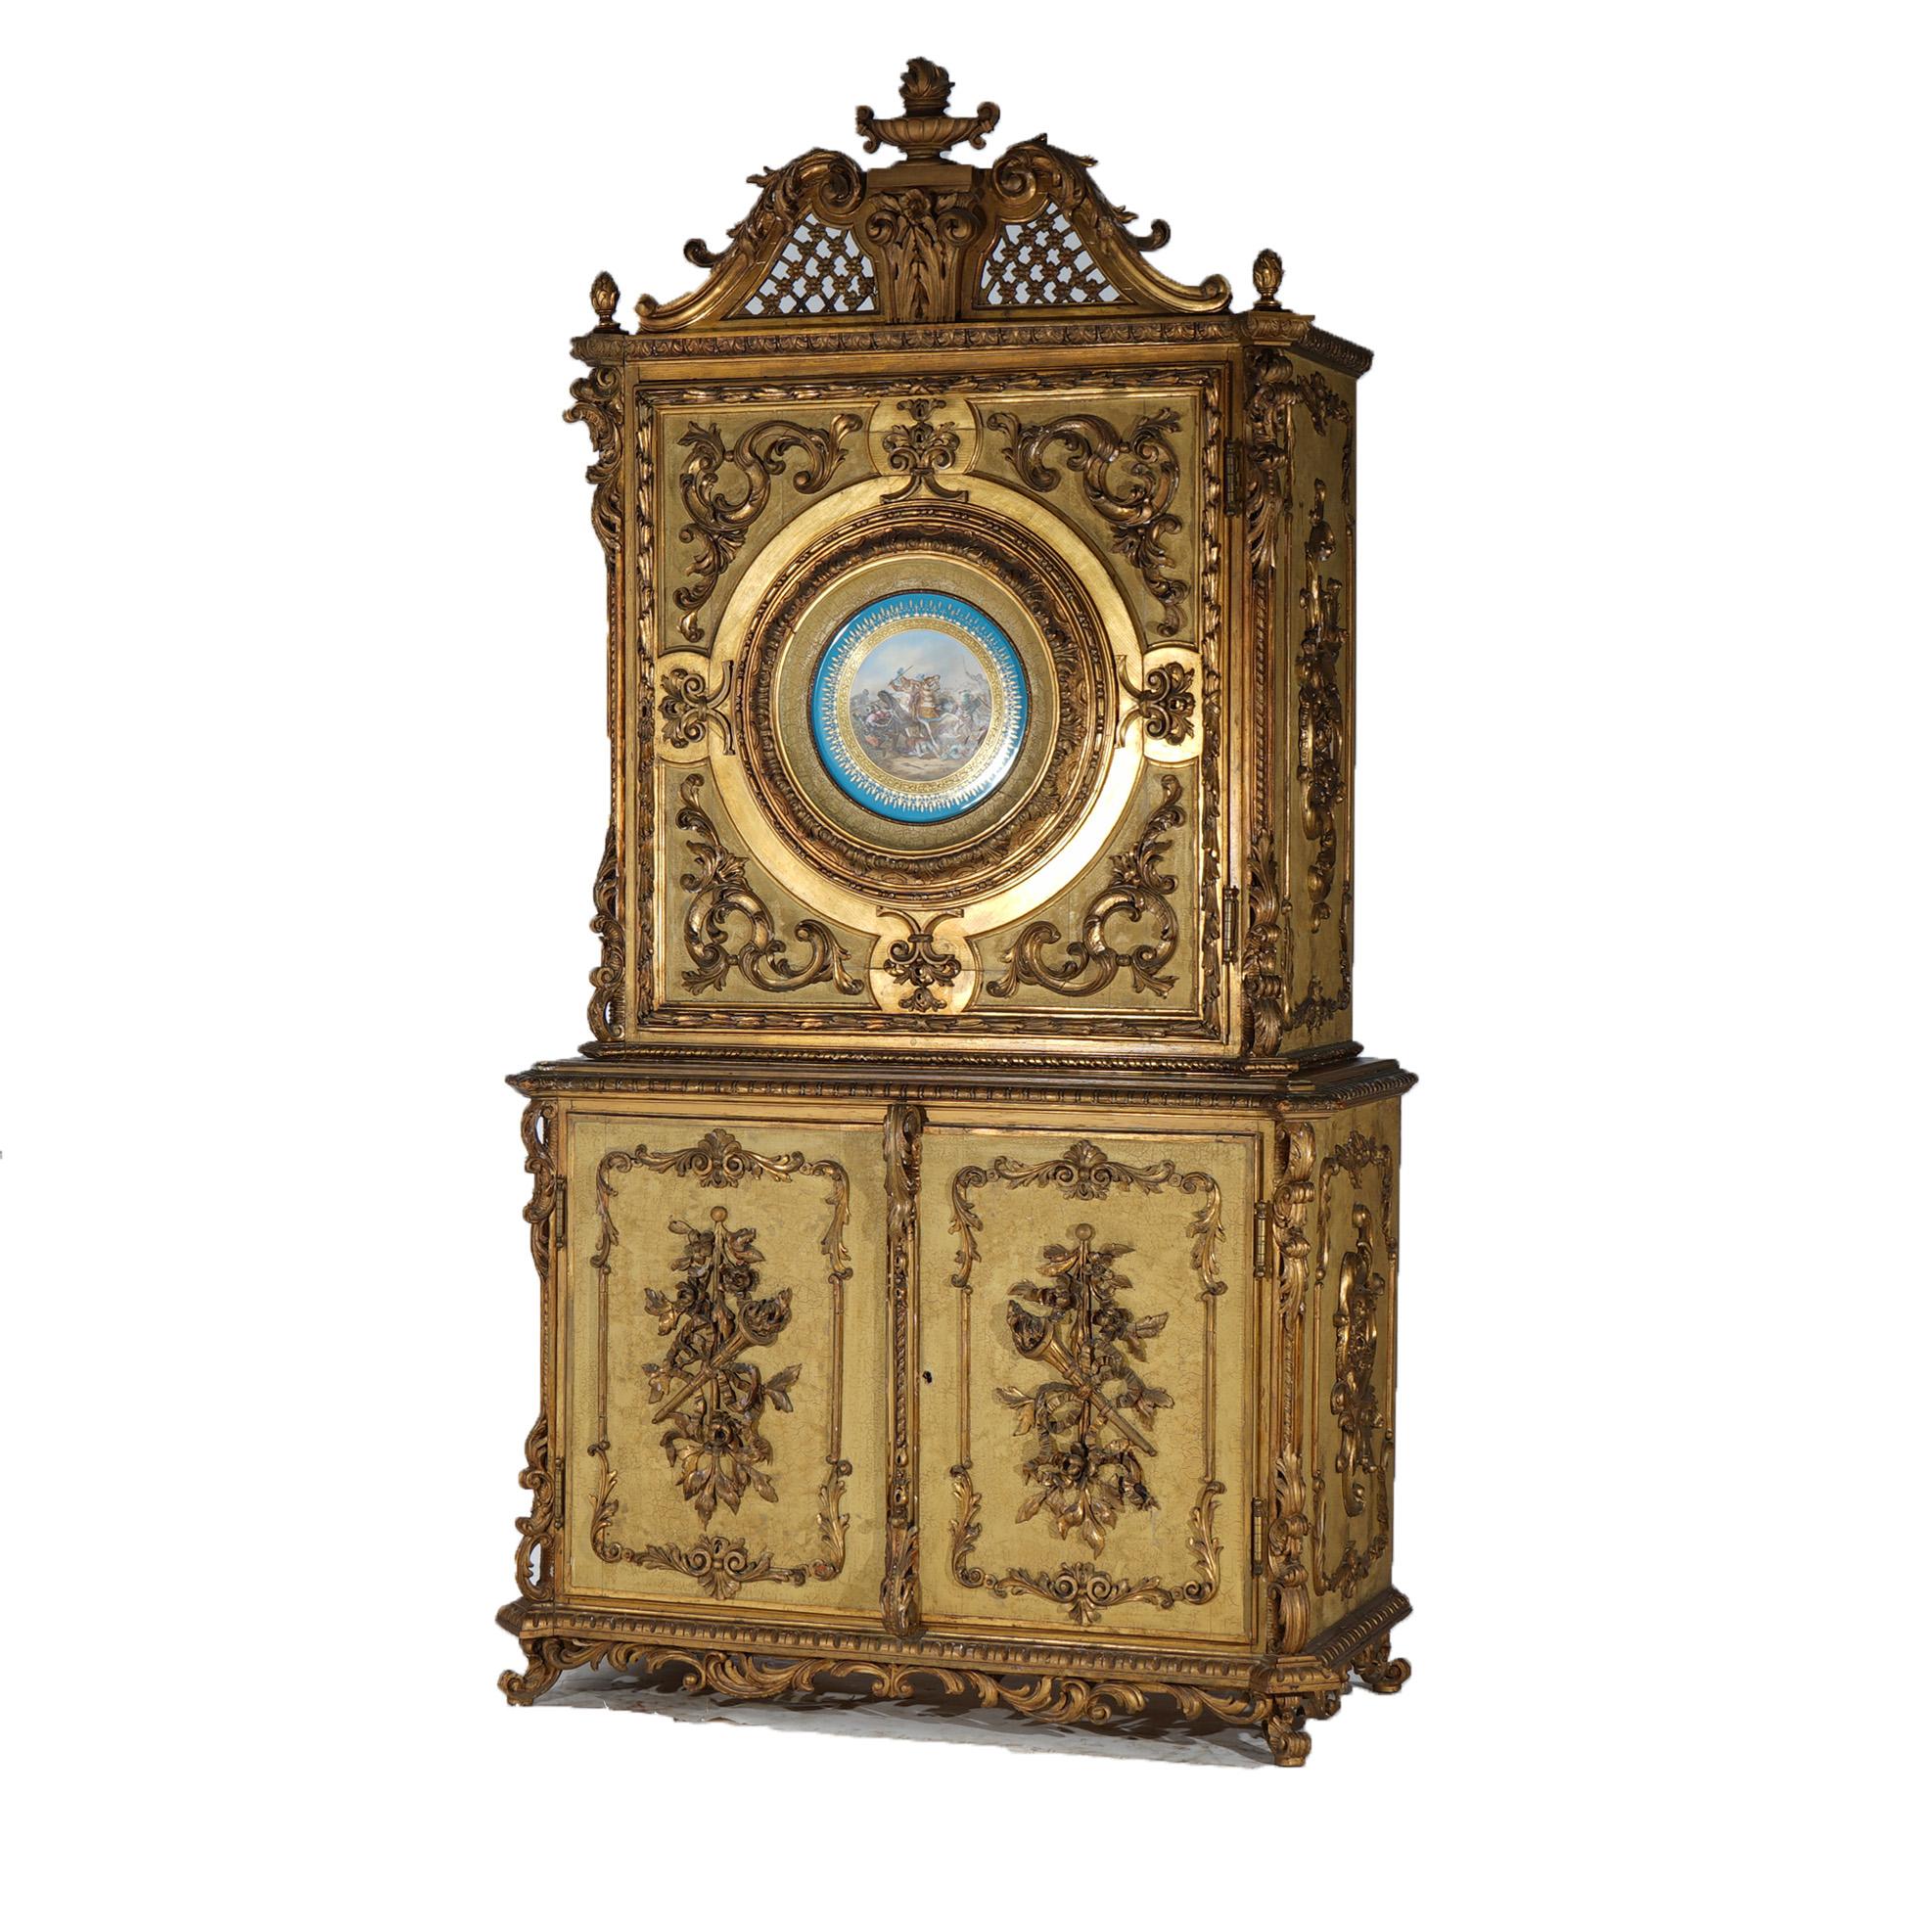 ***Ask About Lower In-House Shipping Rates - Reliable Service, Competitive Rates & Fully Insured***
An antique French Empire style credenza offers giltwood construction with pierced scroll form crest having central flaming urn over upper single door